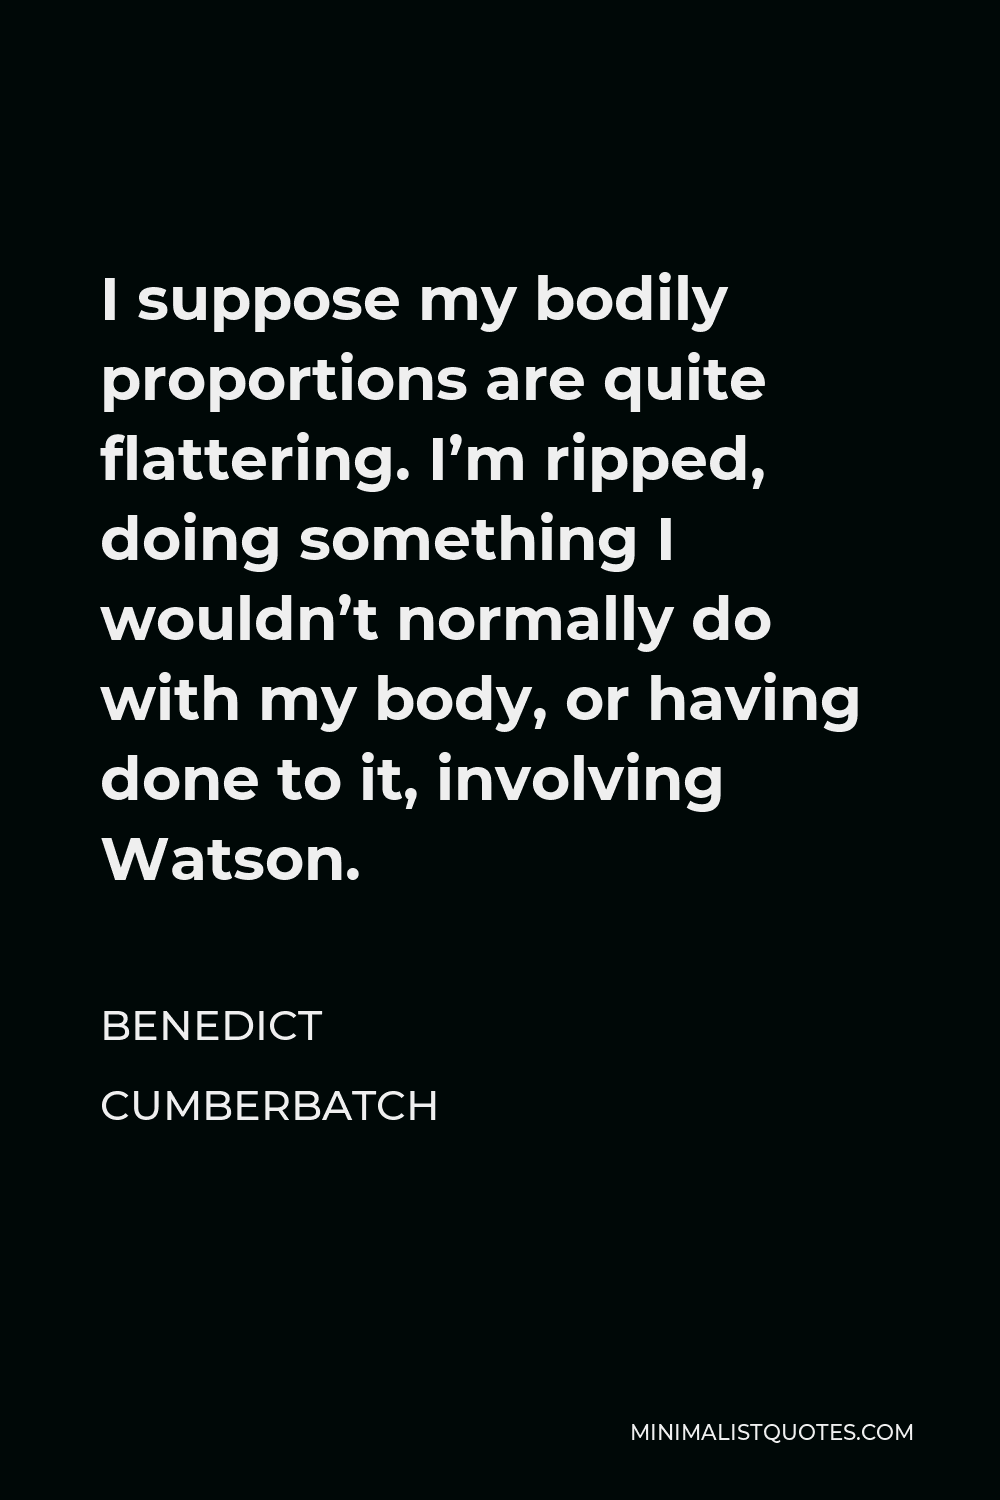 Benedict Cumberbatch Quote - I suppose my bodily proportions are quite flattering. I’m ripped, doing something I wouldn’t normally do with my body, or having done to it, involving Watson.